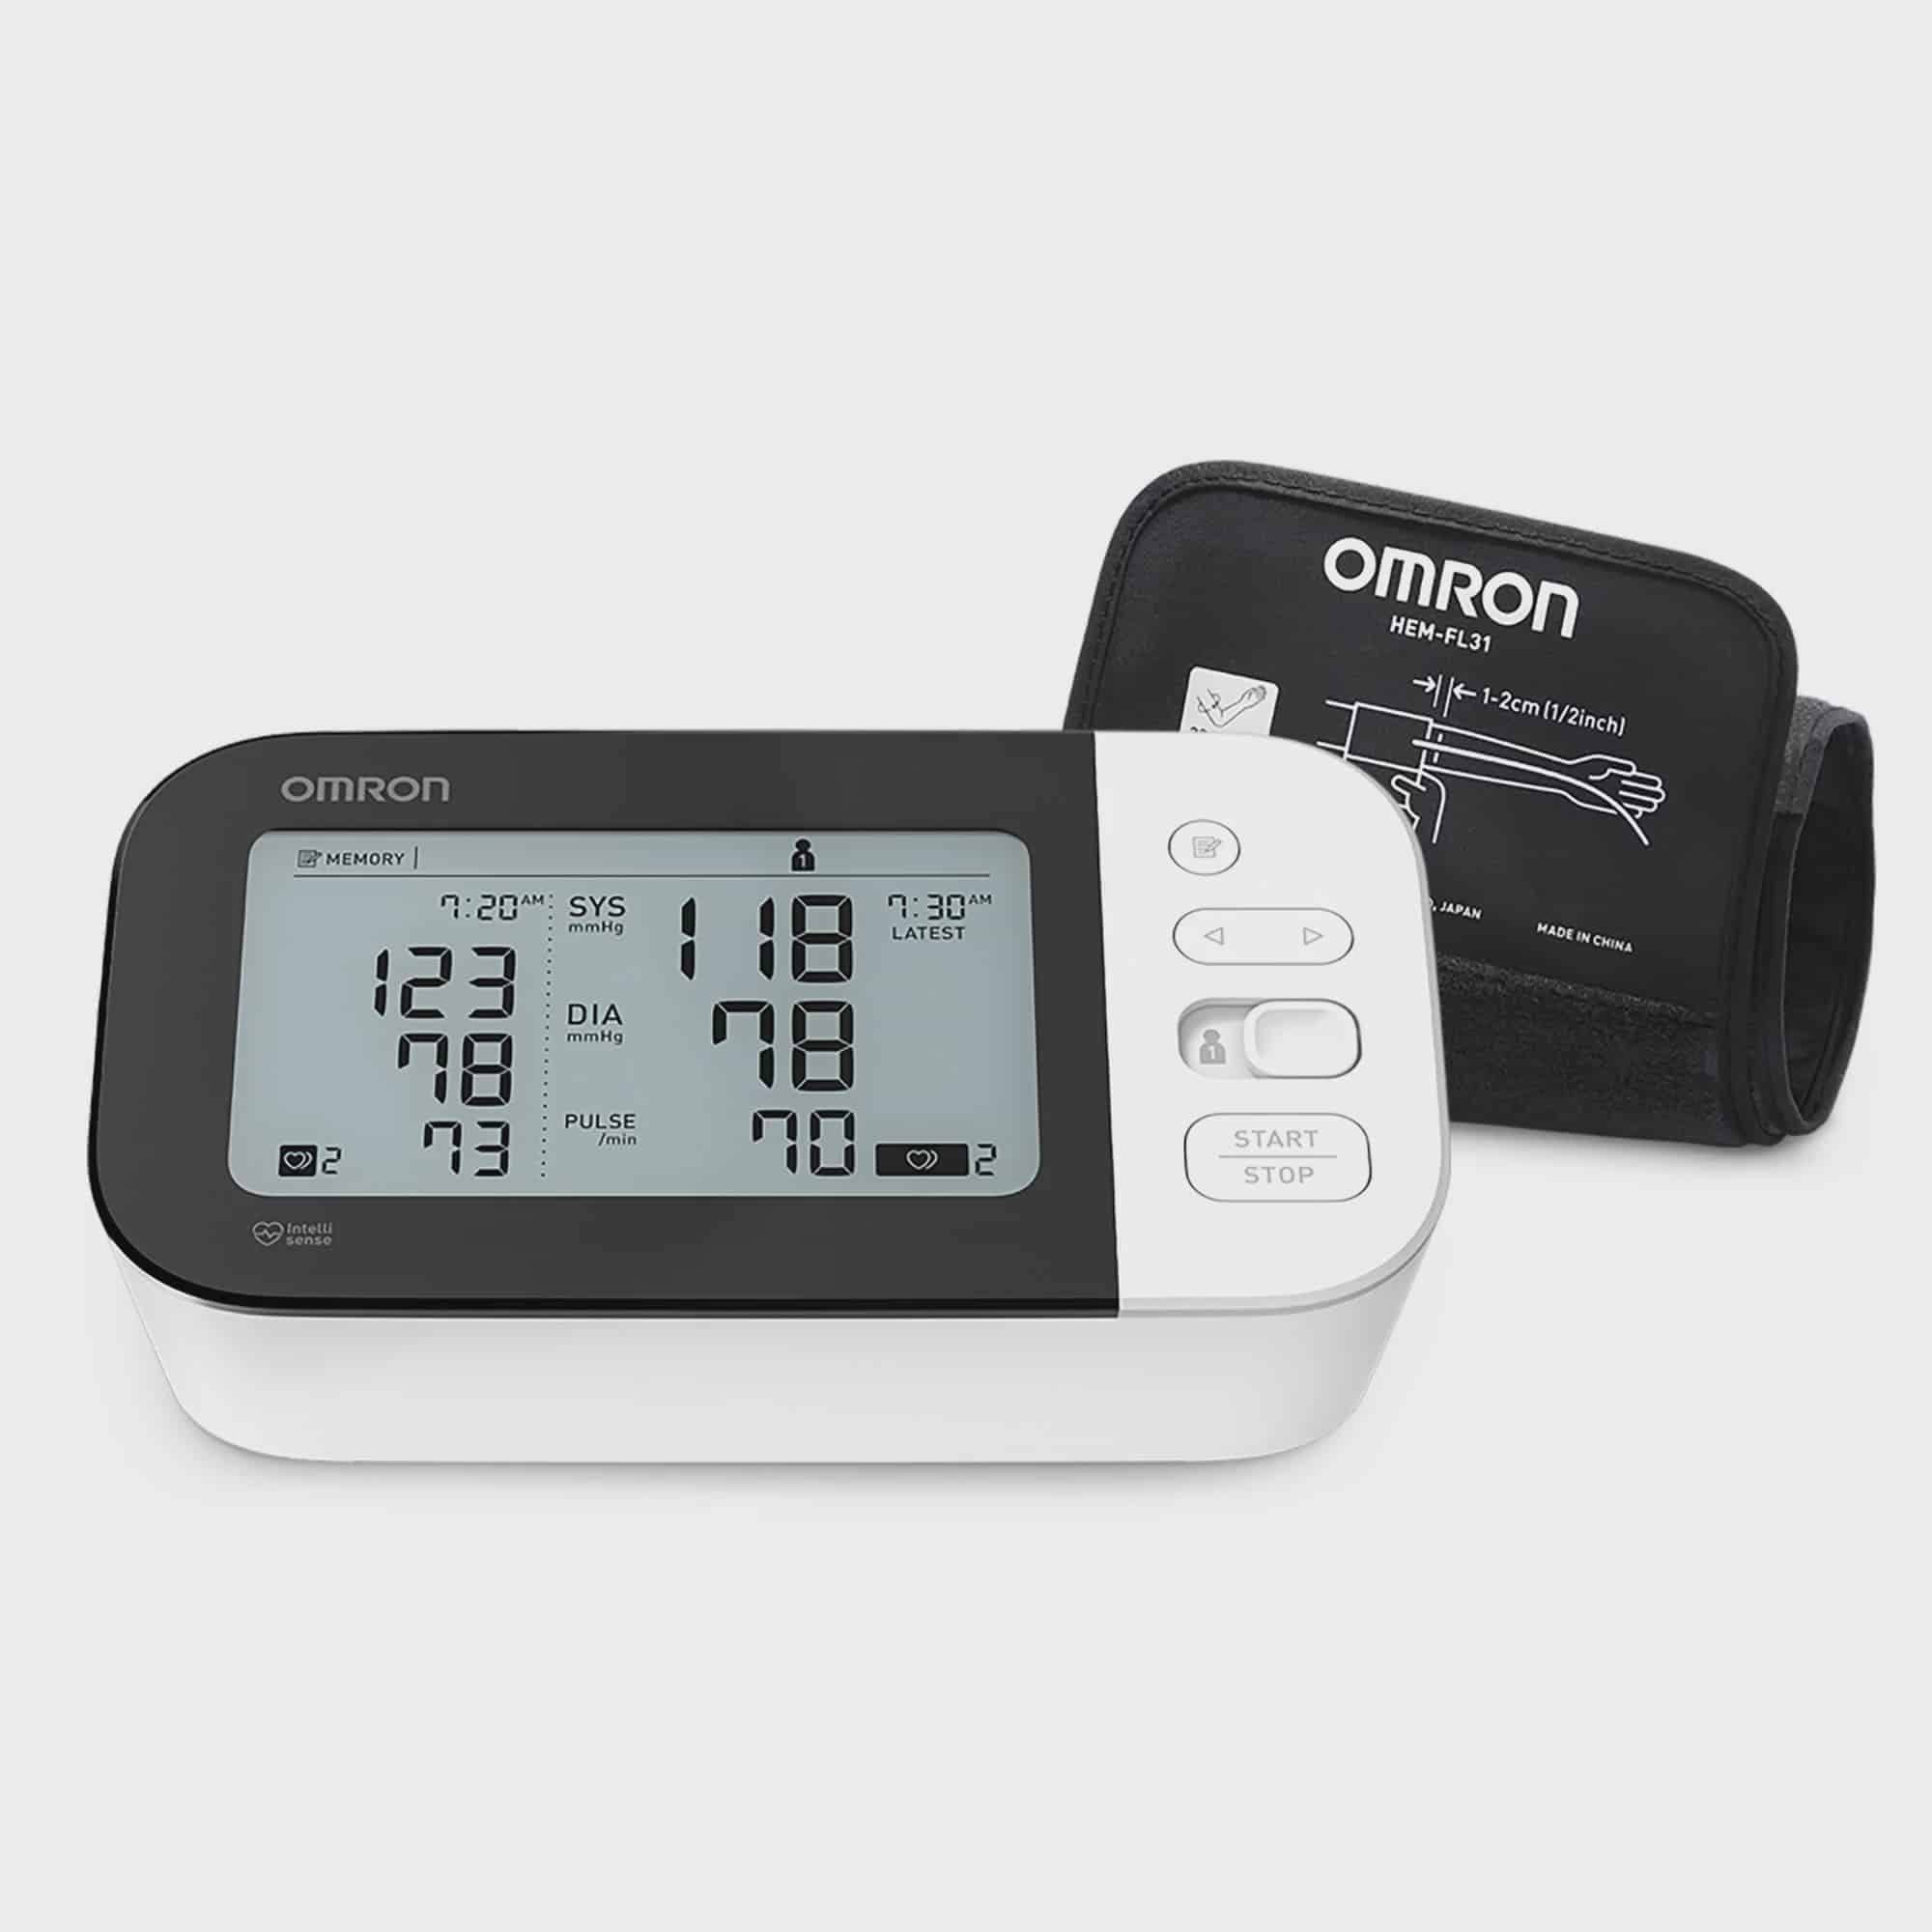 Omron 7 Series Upper Arm Blood Pressure Monitor - 22cm to 42cm